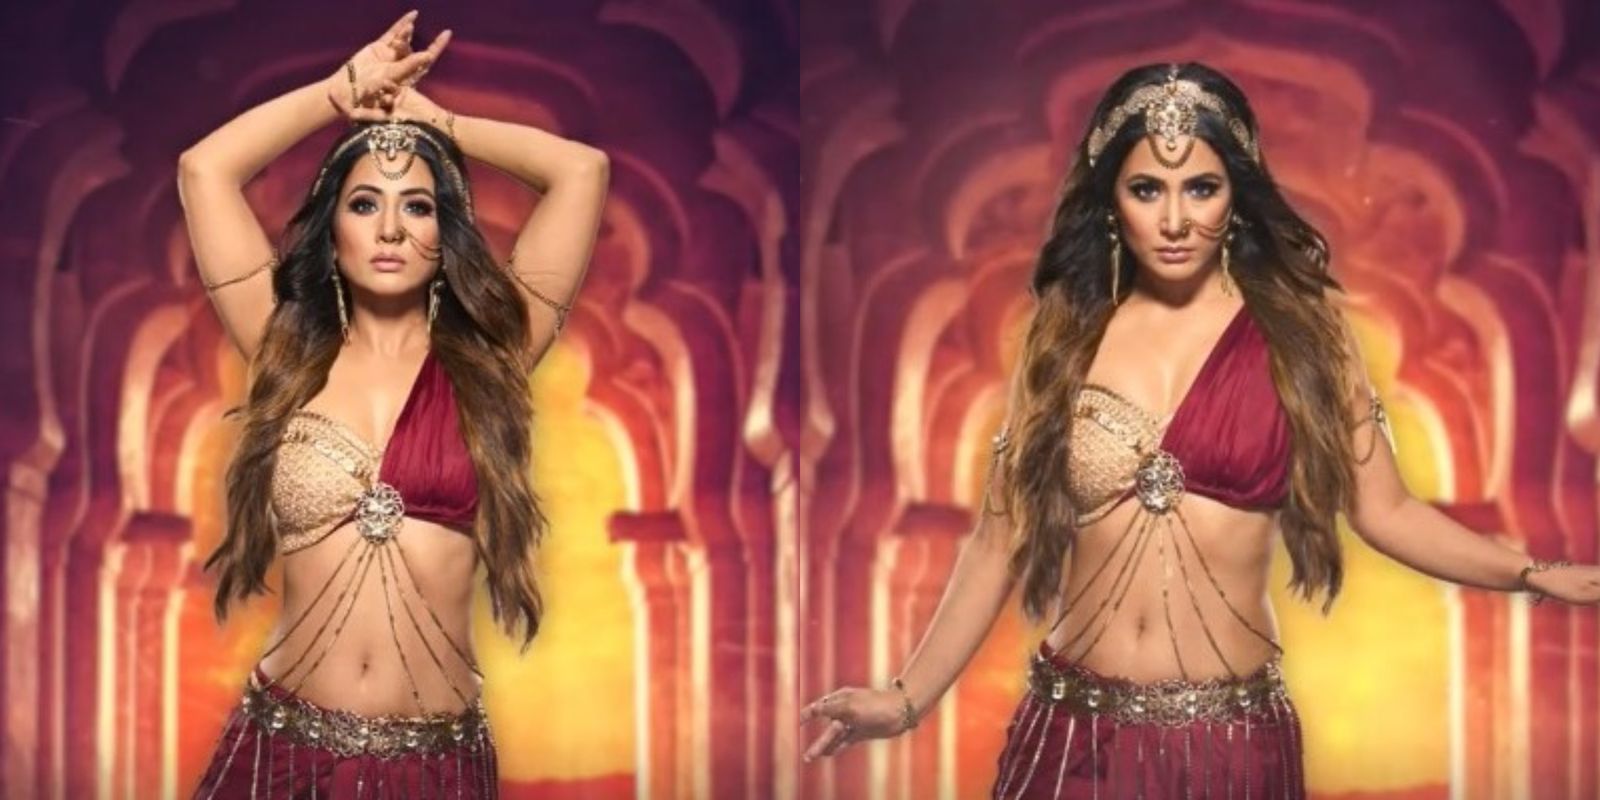 Hina Khan On Naagin 5: “It Is Not Like A Typical Daily Soap, Family Drama, It Is An Indian Folklore”